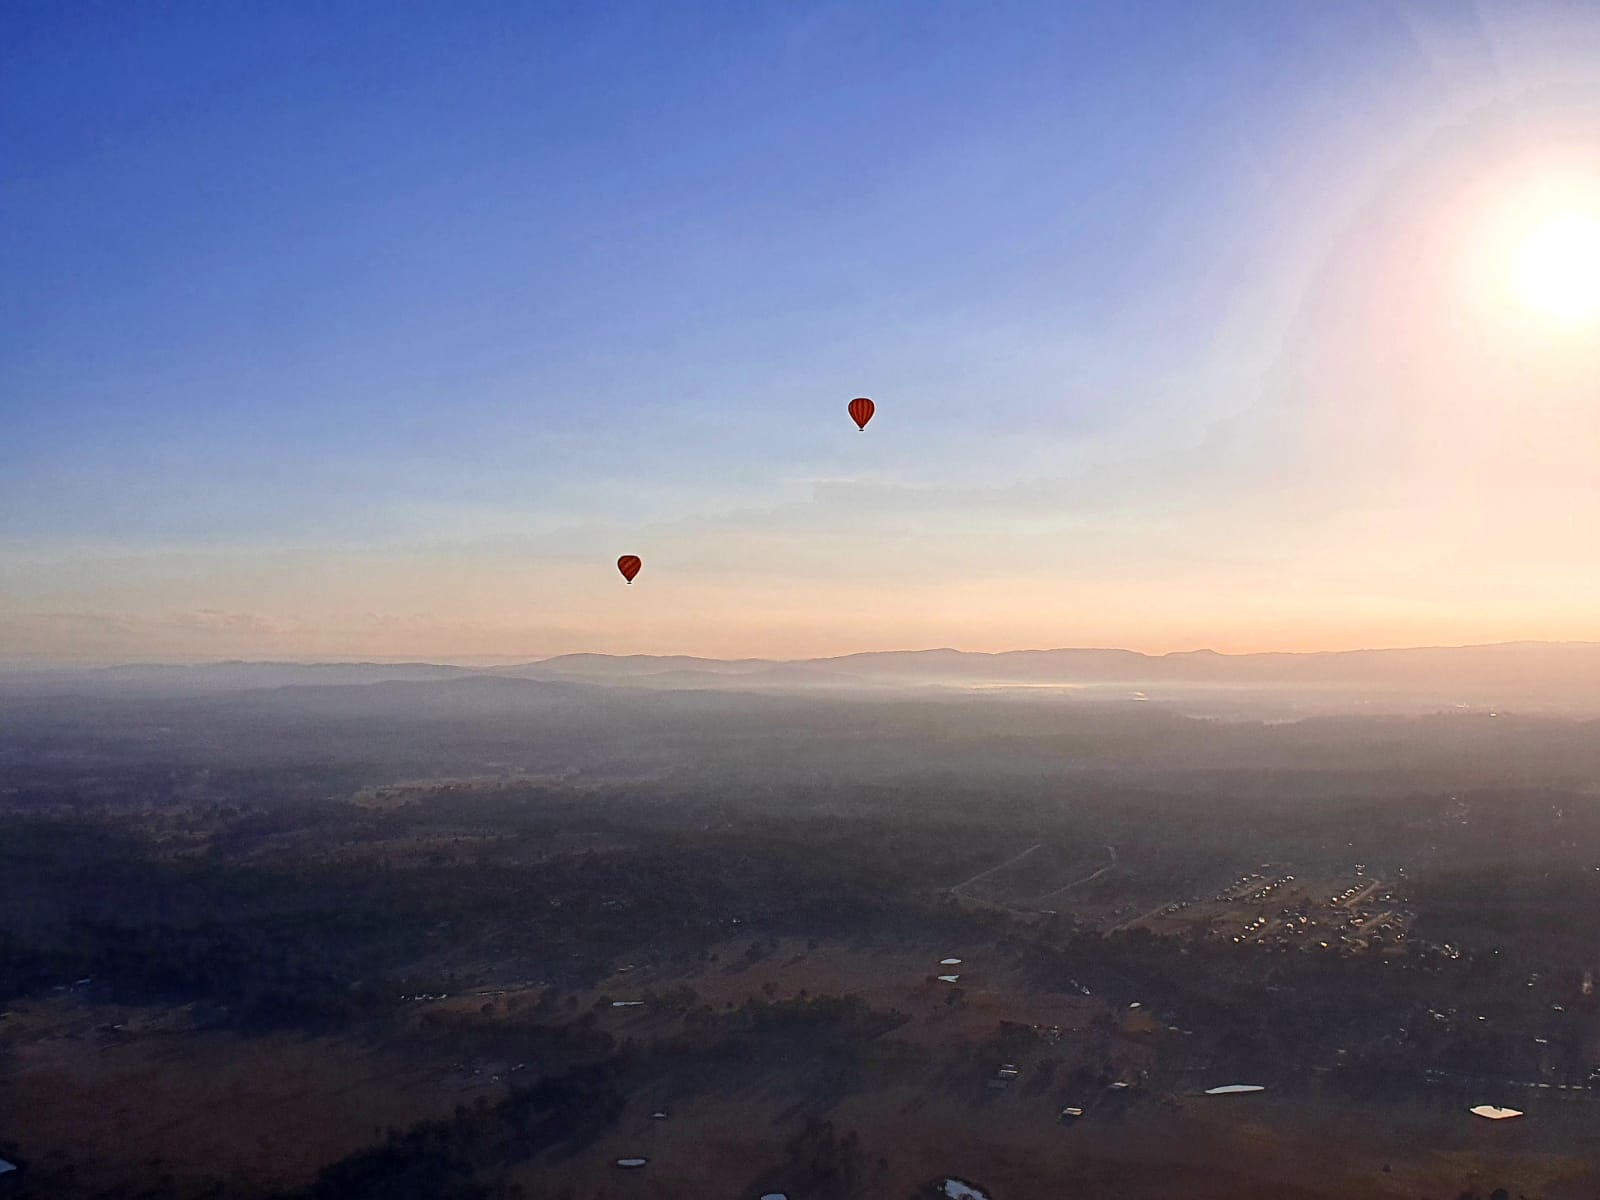 Morning light as two hot airballoons enjoy the view.